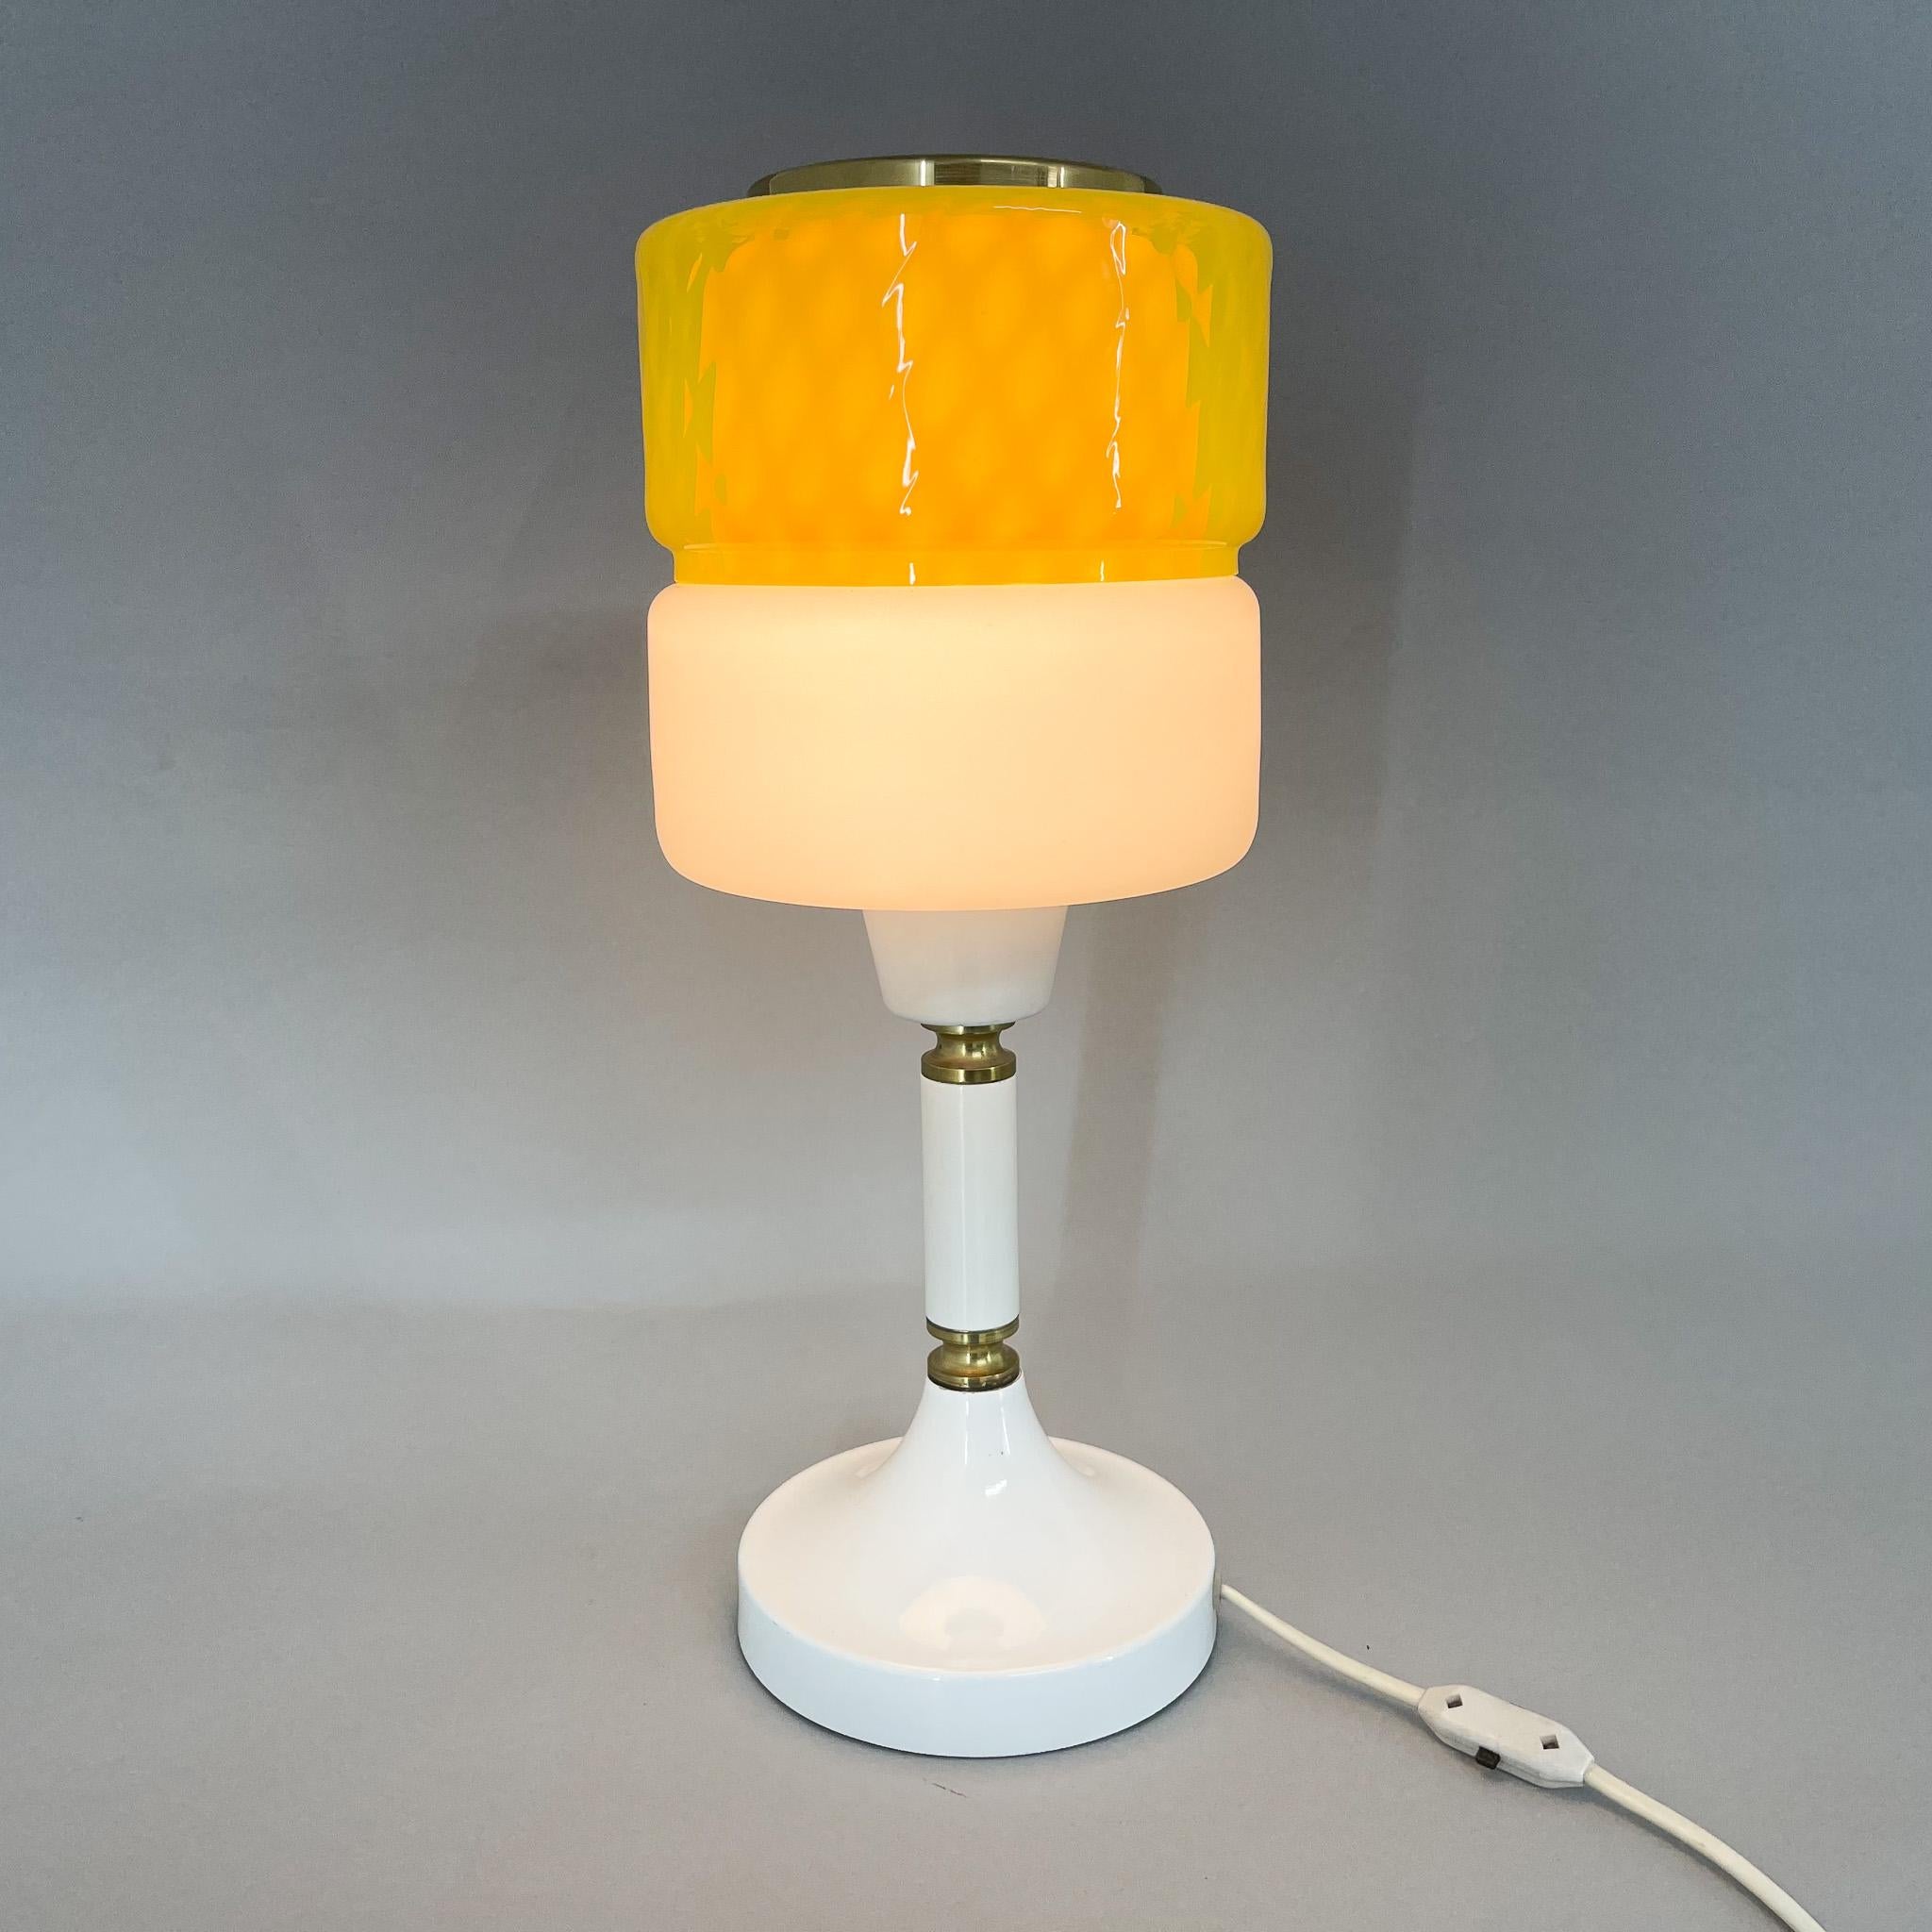 Vintage table lamp manufactured by Drukov in former Czechoslovakia in the 1970s. Made of metal, brass and coloured glass. Very good vintage condition.